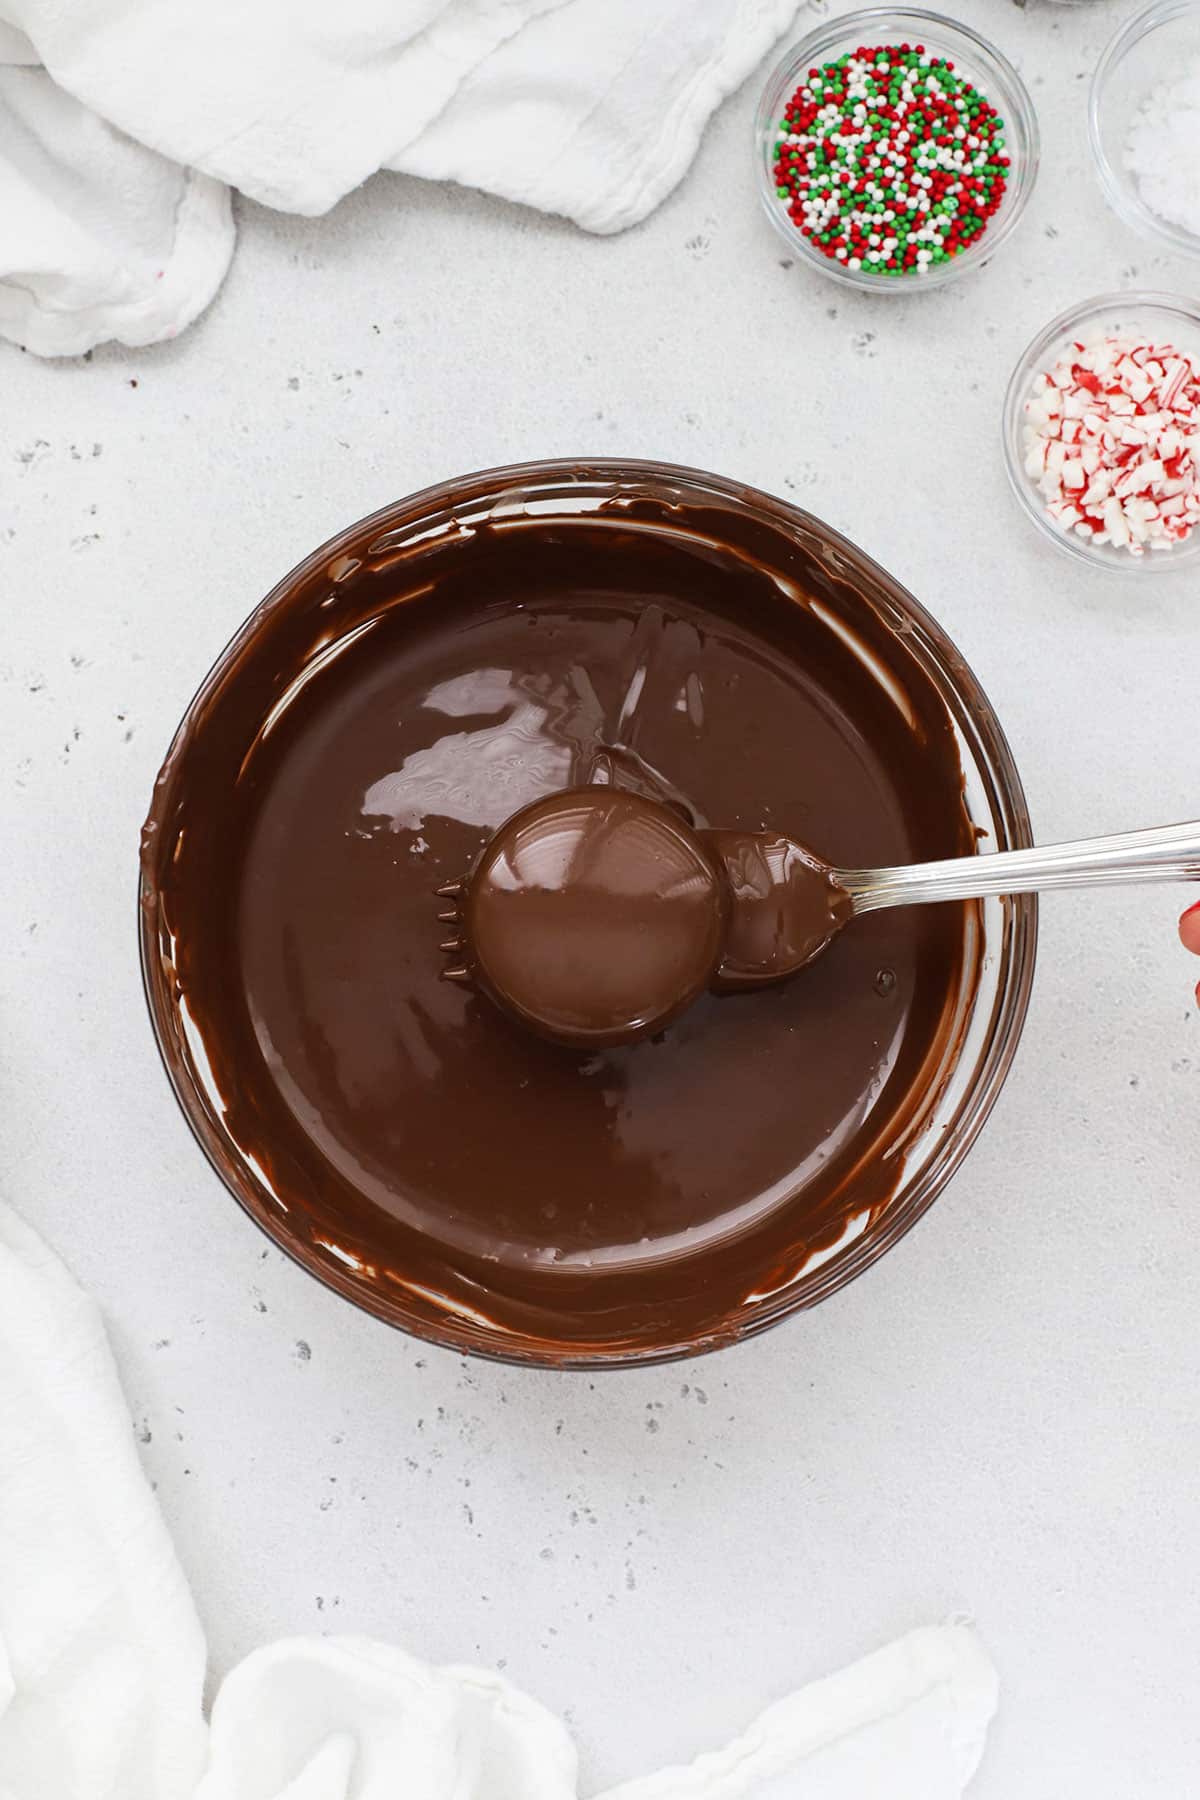 dipping gluten-free Oreos in chocolate candy melts